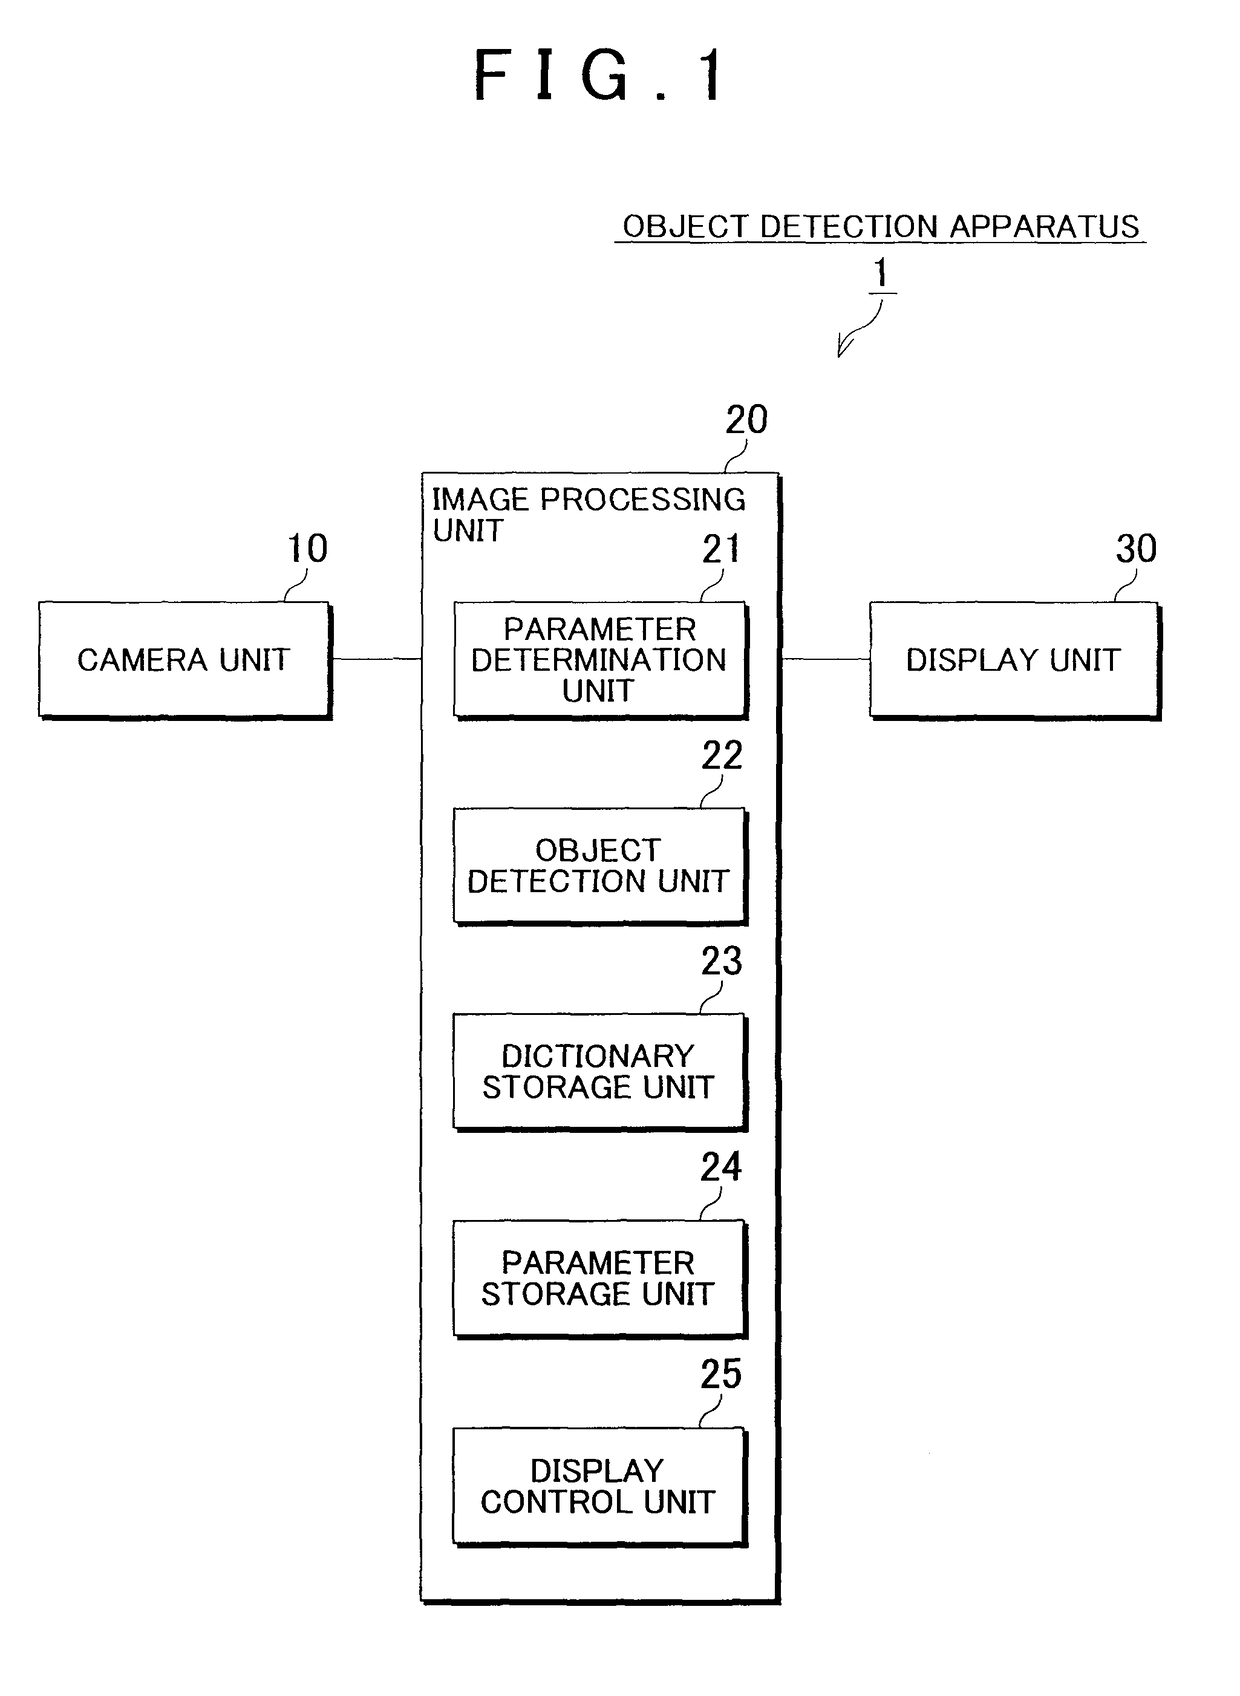 Object detection apparatus, method and program